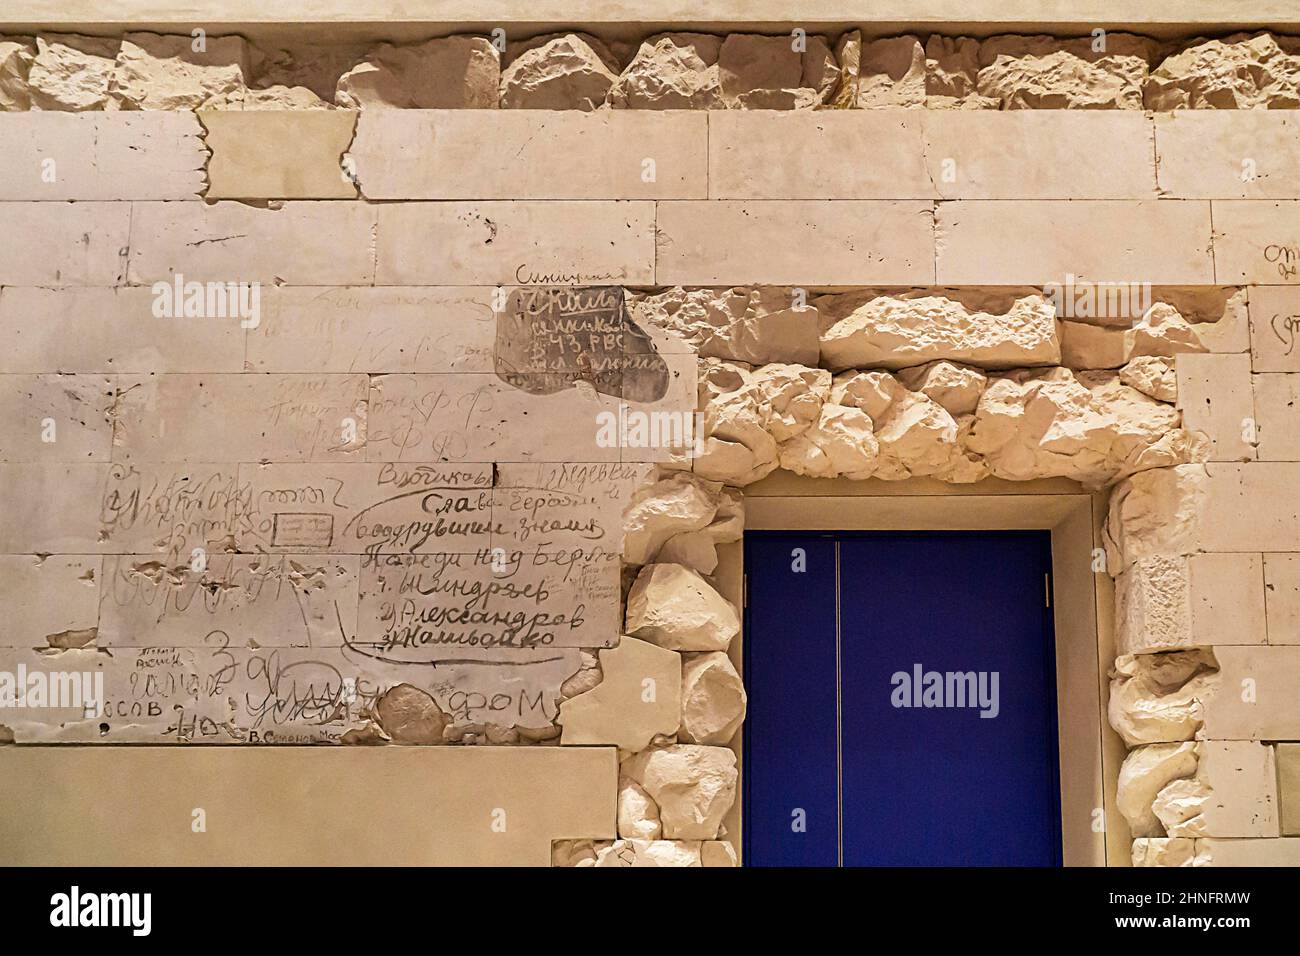 Stone fragments of the 1945 Reichstag ruins reused with original Russian writing, Berlin, Germany Stock Photo